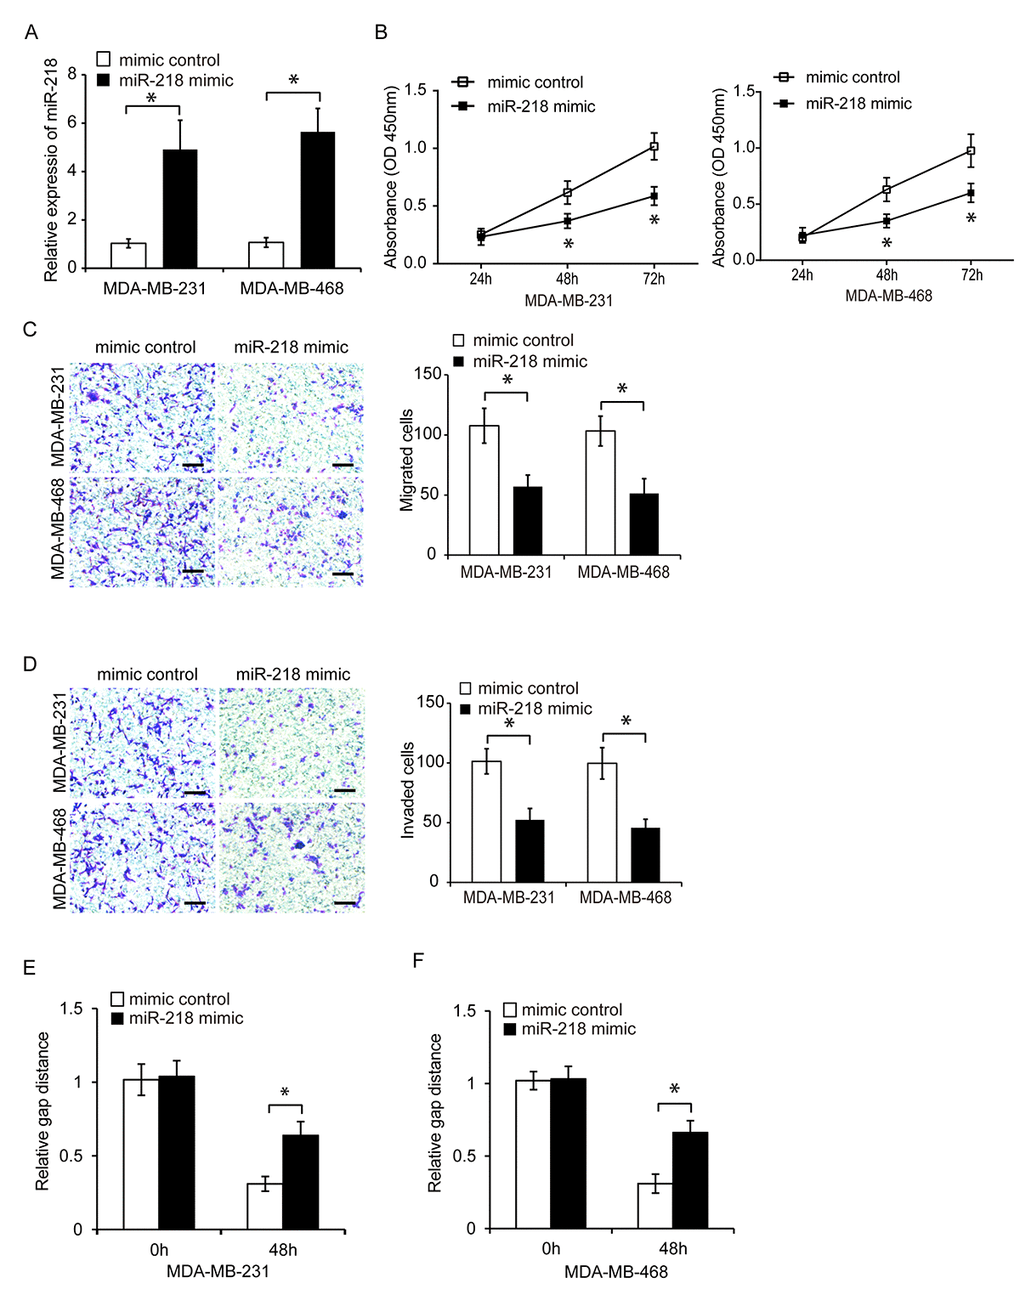 Overexpression of miR-218 suppresses TNBC cell proliferation, migration, and invasion. (A) Relative miR-218 expression in TNBC cells following transfection with a miRNA mimic or miR-218 mimic control. (B) Analysis of TNBC cell proliferation following transfection with a miR-218 mimic or miRNA mimic control using CCK8 assays. (C, D) Analysis of the migration and invasion capacities of MDA-MB-231 and MDA-MB-468 cells following transfection with a miR-218 mimic or miRNA mimic control using transwell assays. (E, F) Analysis of the migration capacity of MDA-MB-231 and MDA-MB-468 cells following transfection with either a miR-218 mimic or miRNA mimic control using wound healing assays. Scale bars, 200 μm. *P 